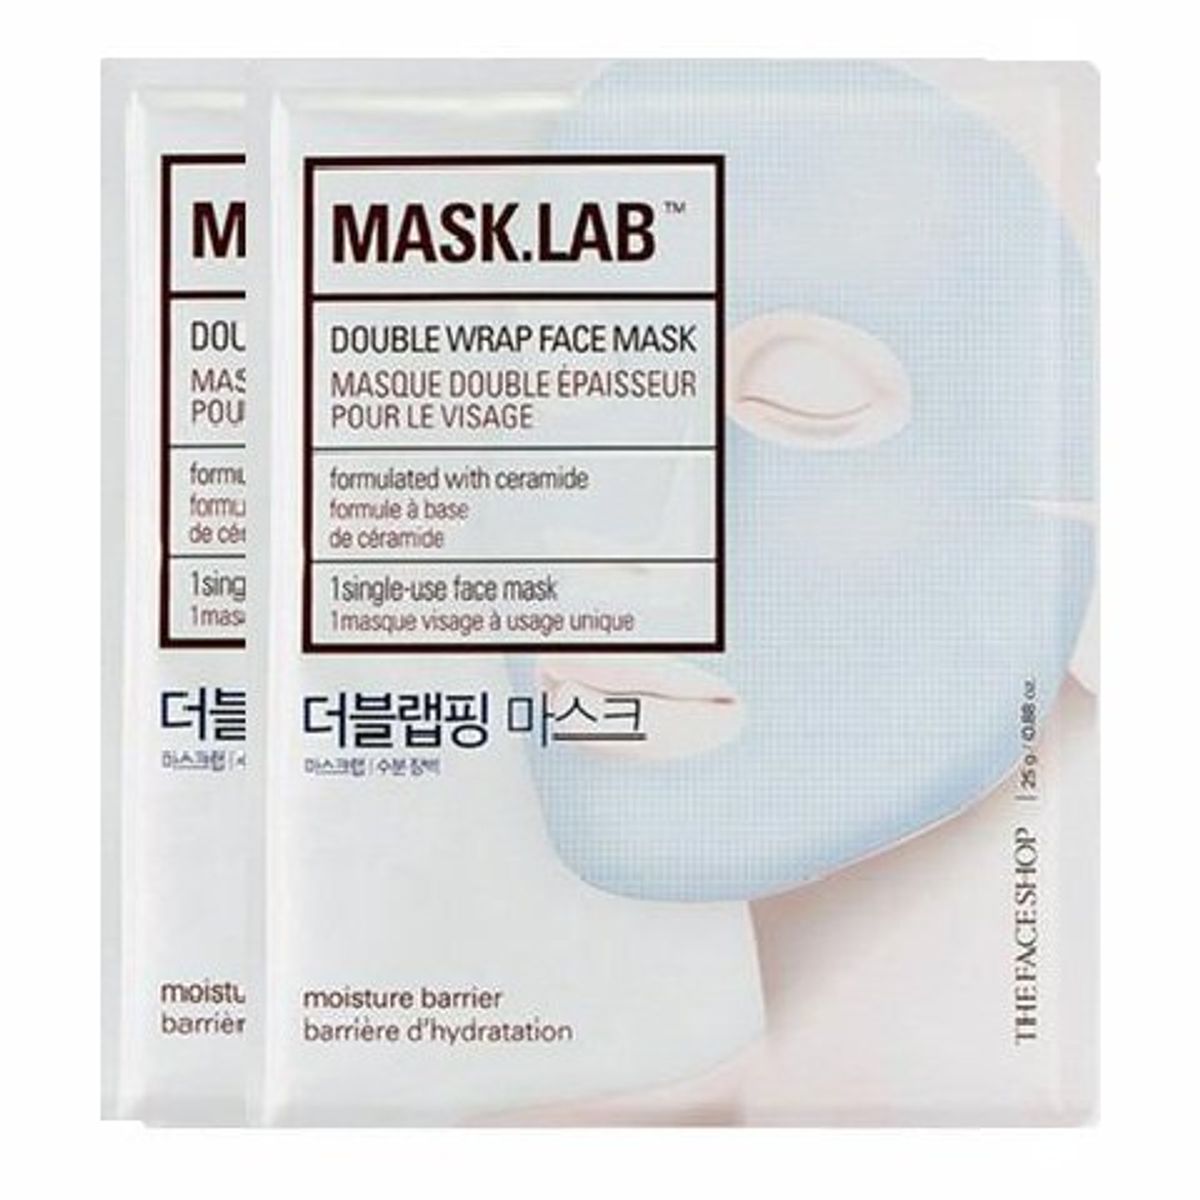 mat-na-giay-mask-lab-double-wrap-face-mask-2-sheets-1